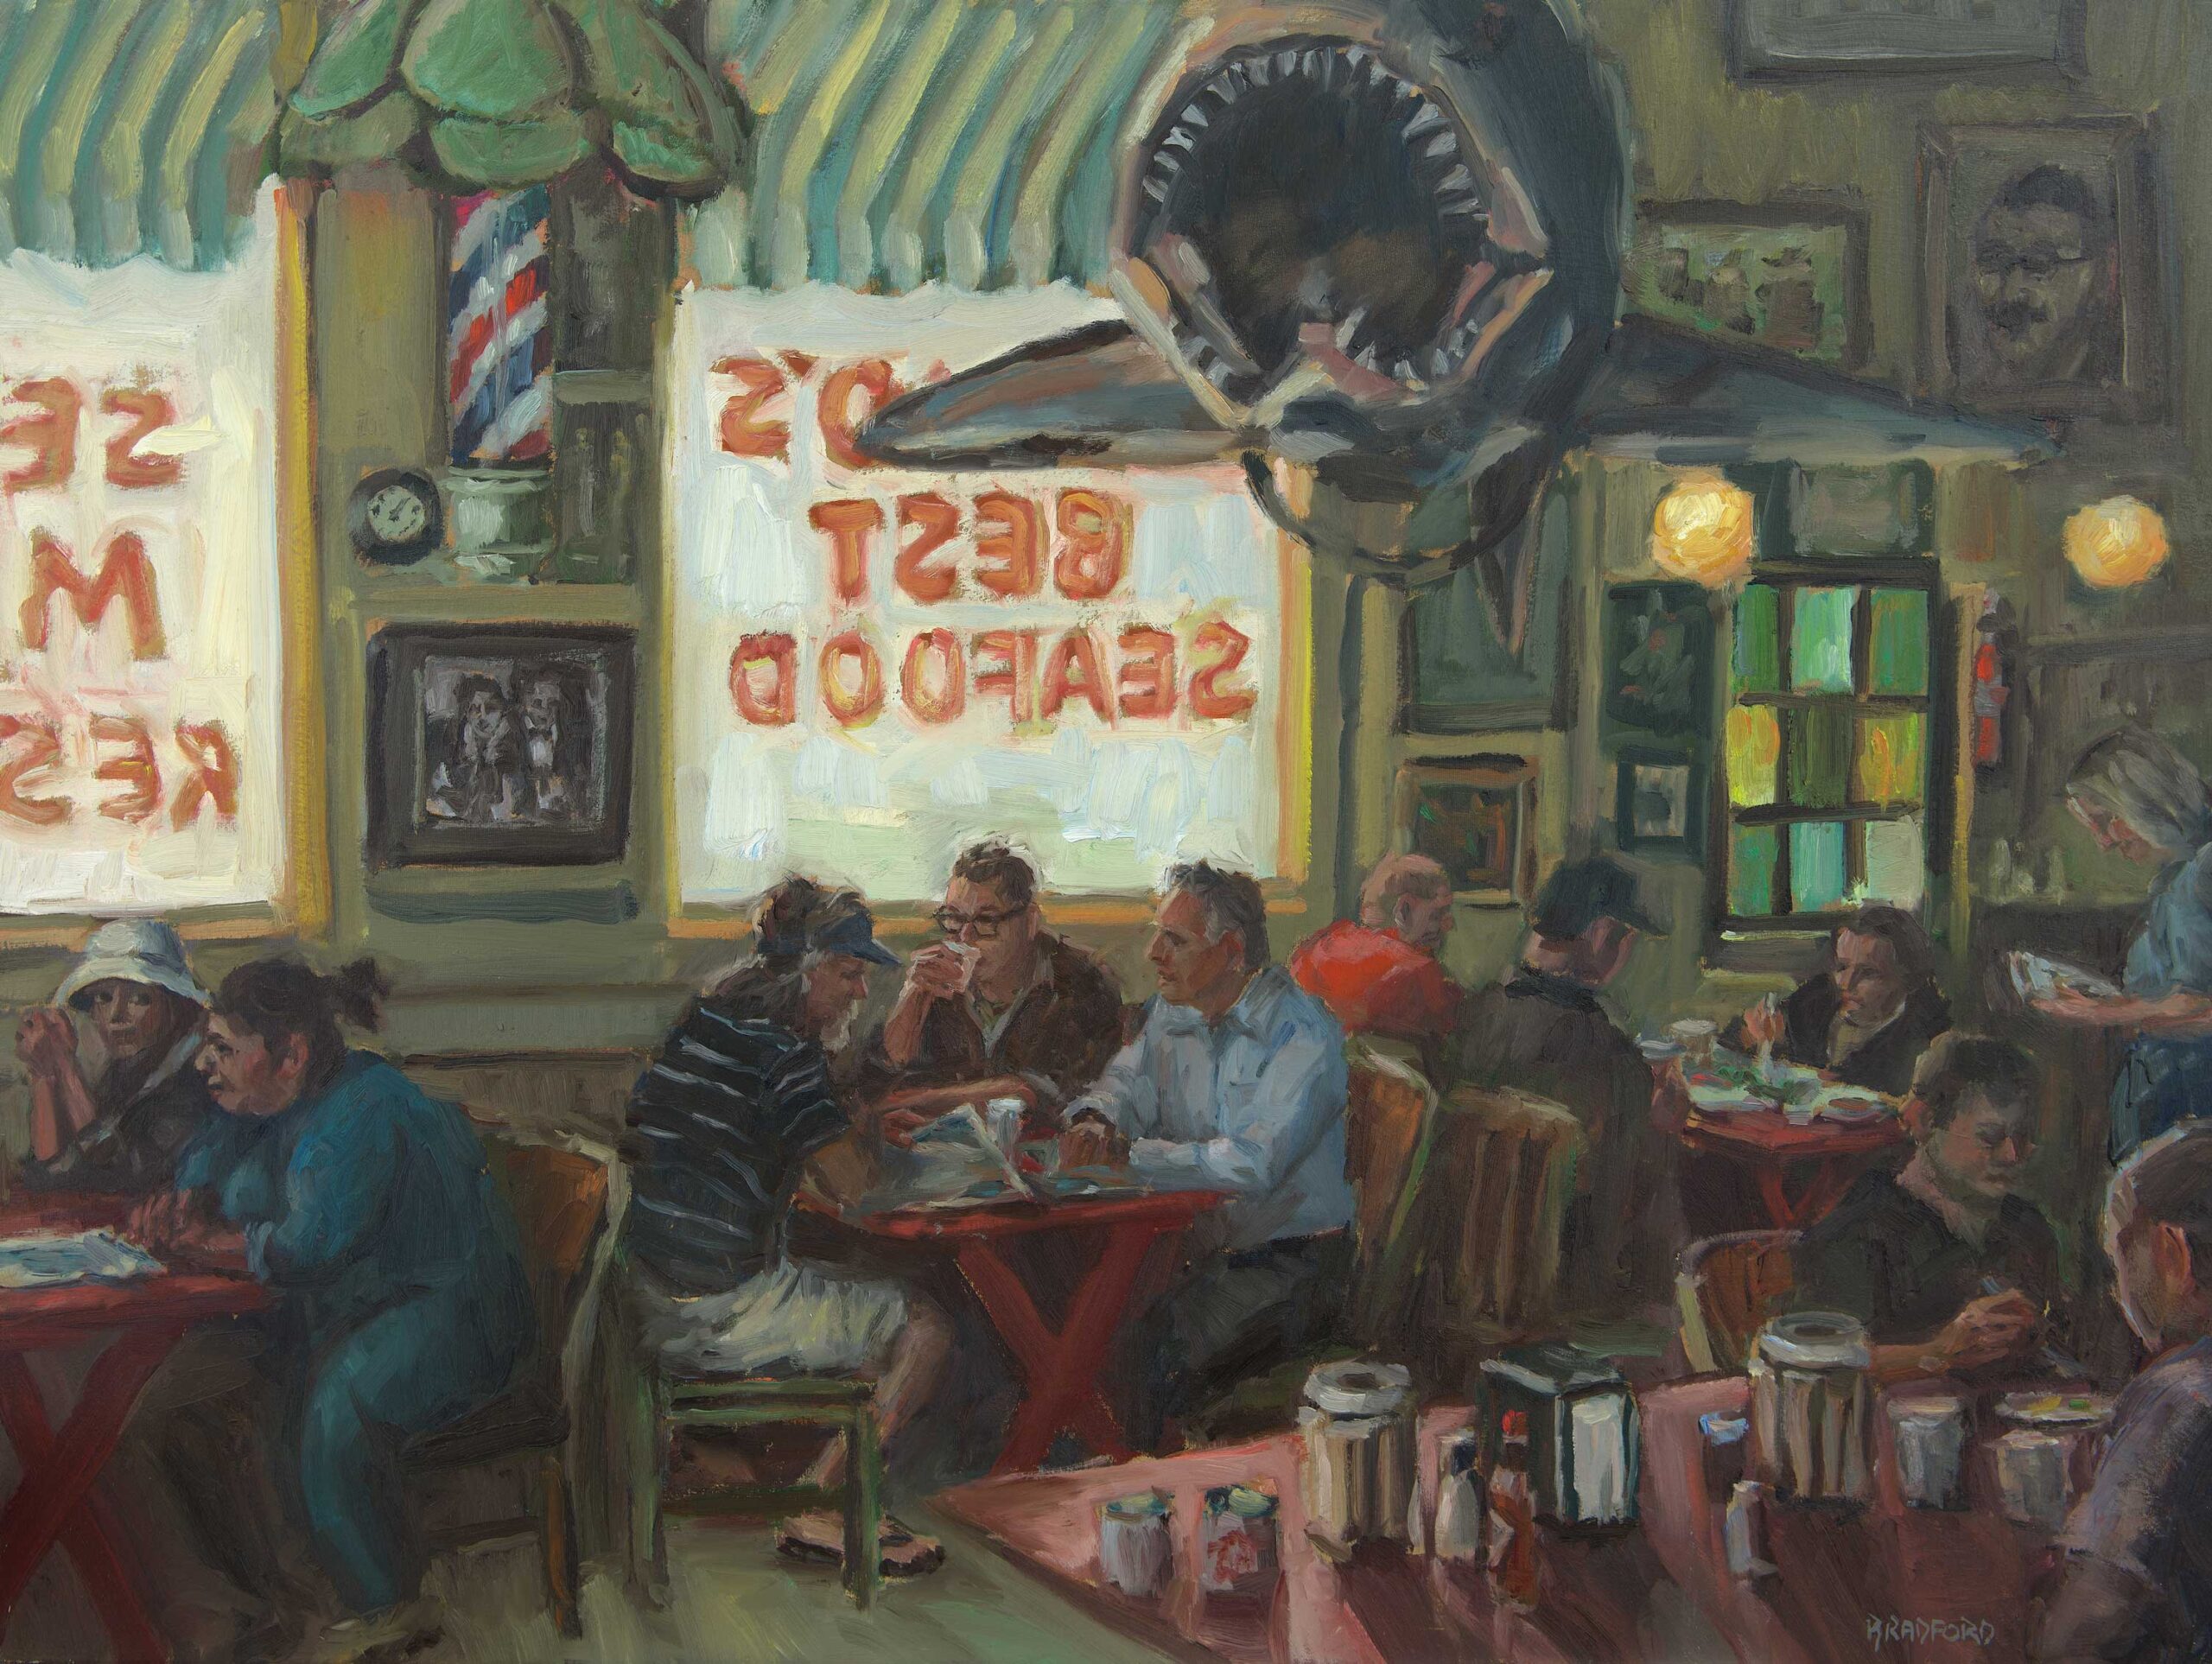 BRADFORD J. SALAMON, "Monday at the Crab Cooker," 2016, Oil on canvas, 30 x 40”, The Hilbert Collection 